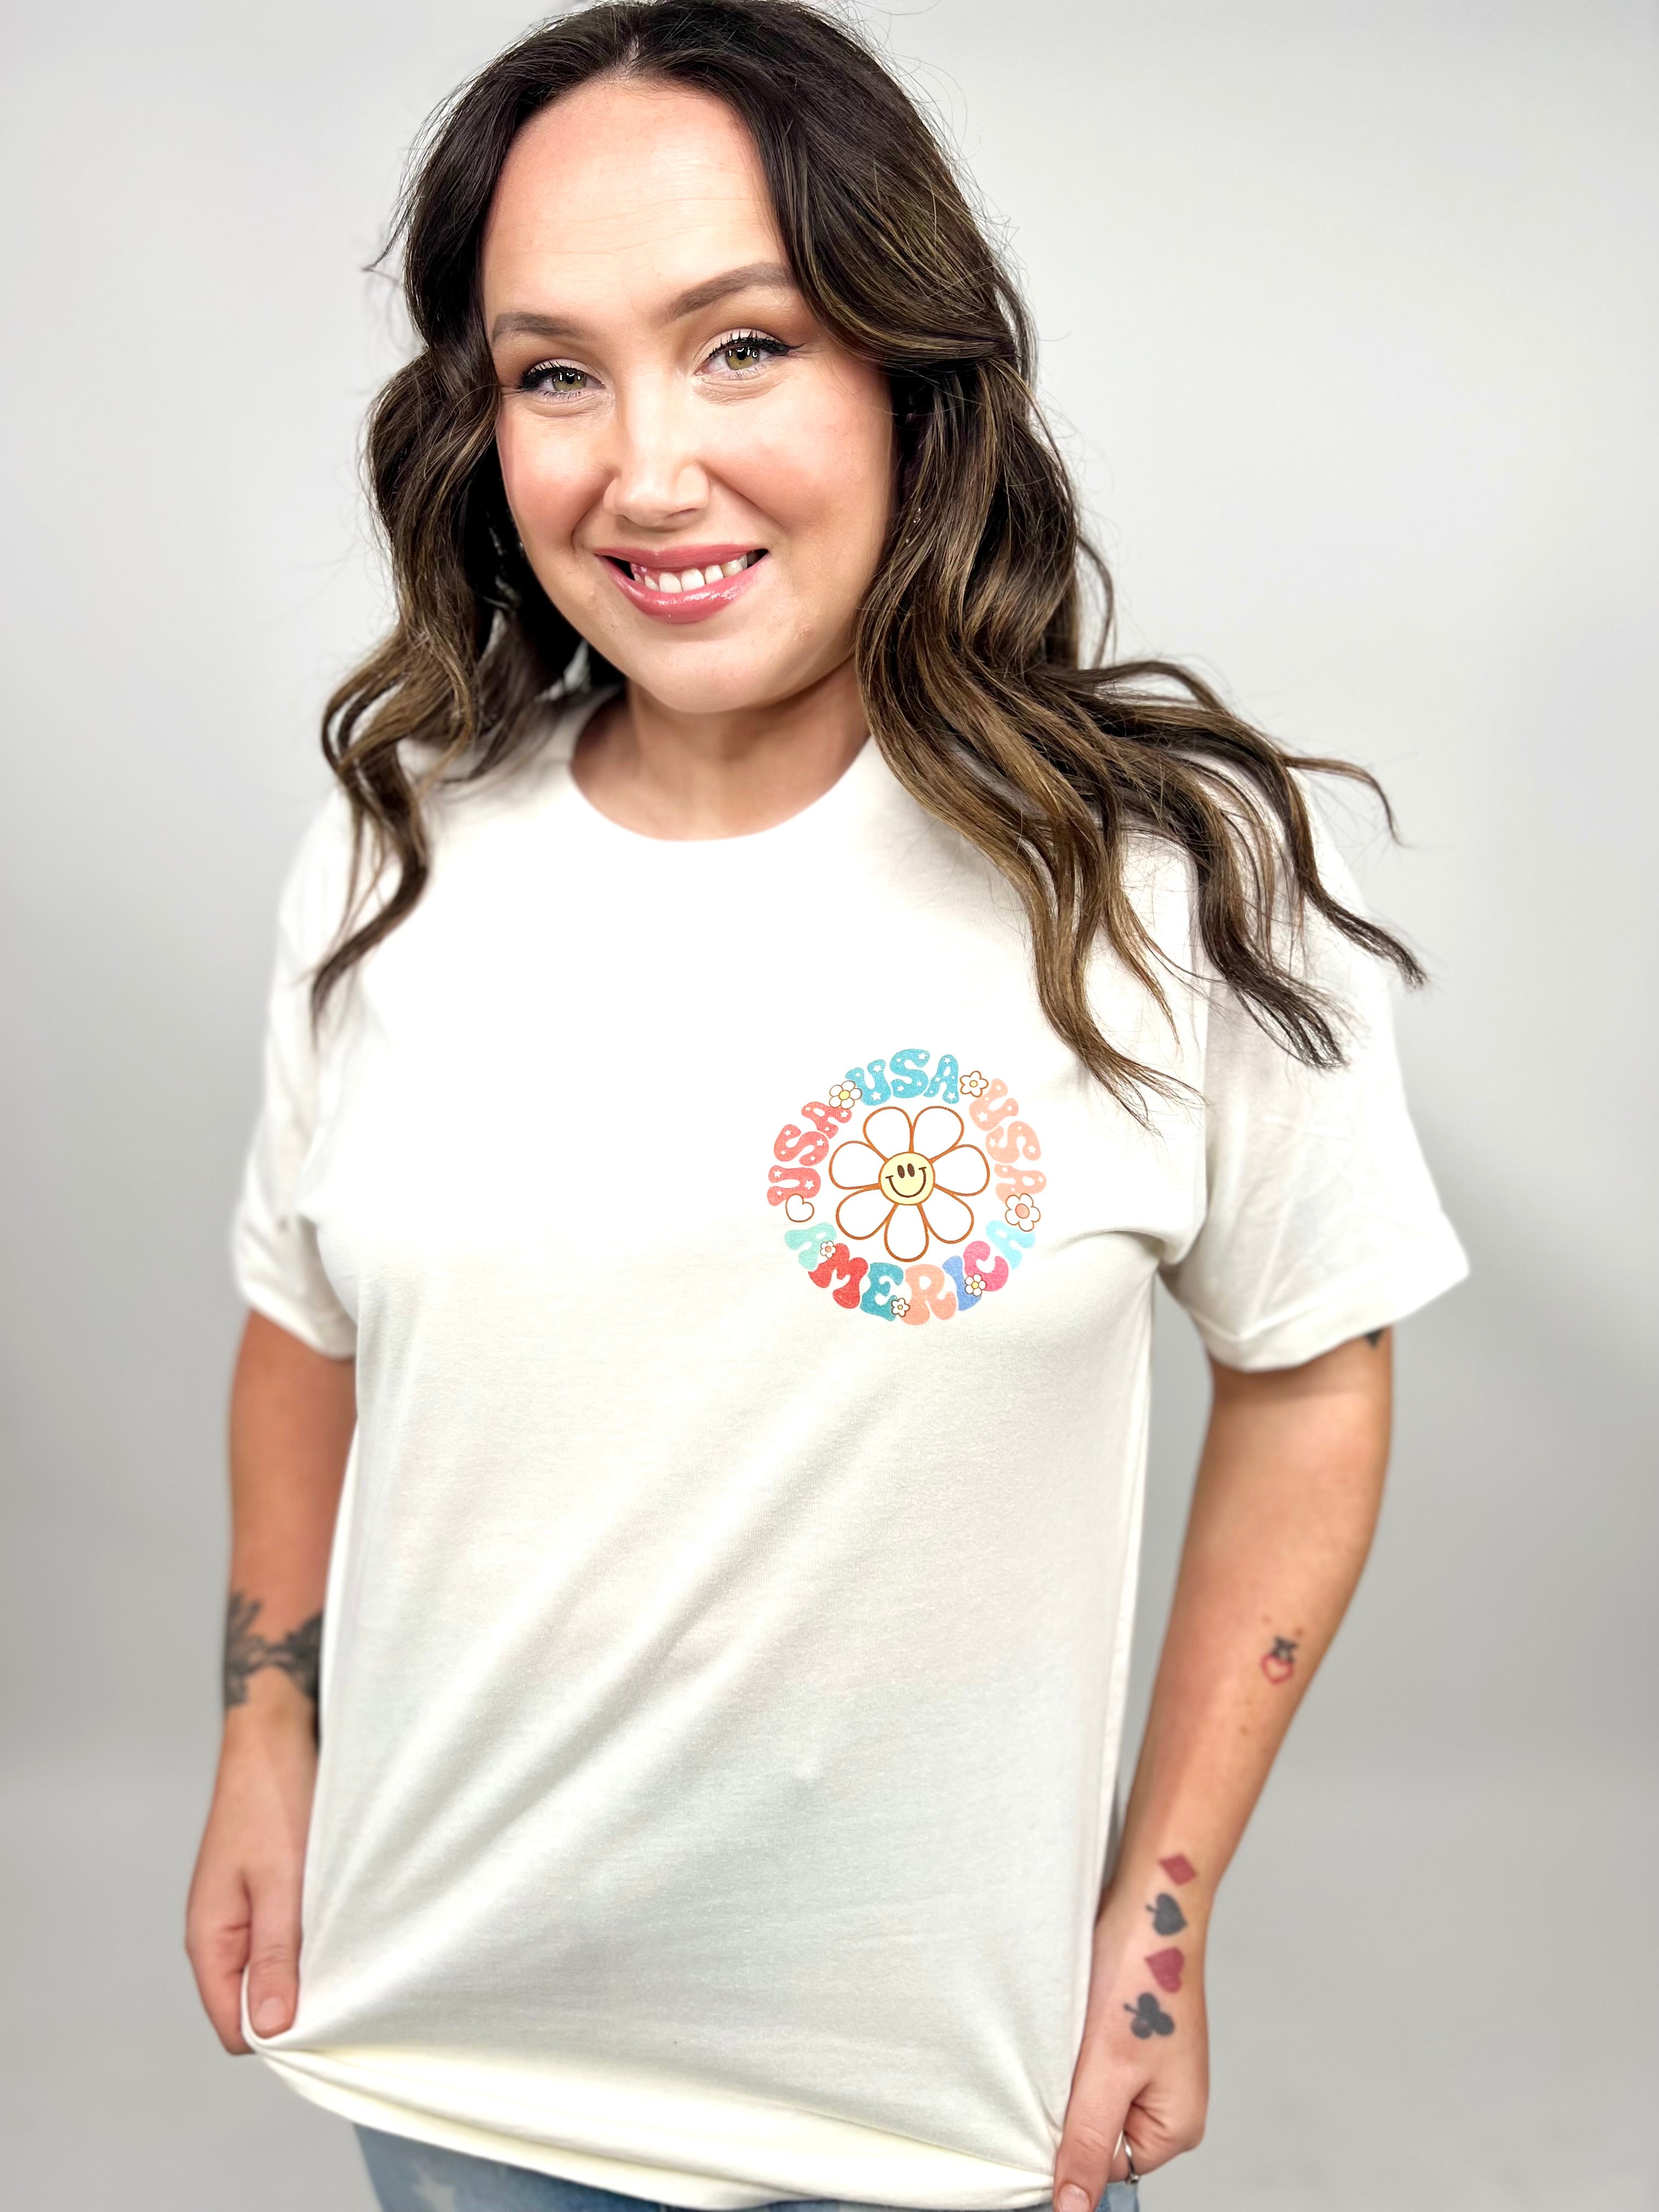 USA Retro Rainbow Graphic Tee-130 Graphic Tees-Heathered Boho-Heathered Boho Boutique, Women's Fashion and Accessories in Palmetto, FL